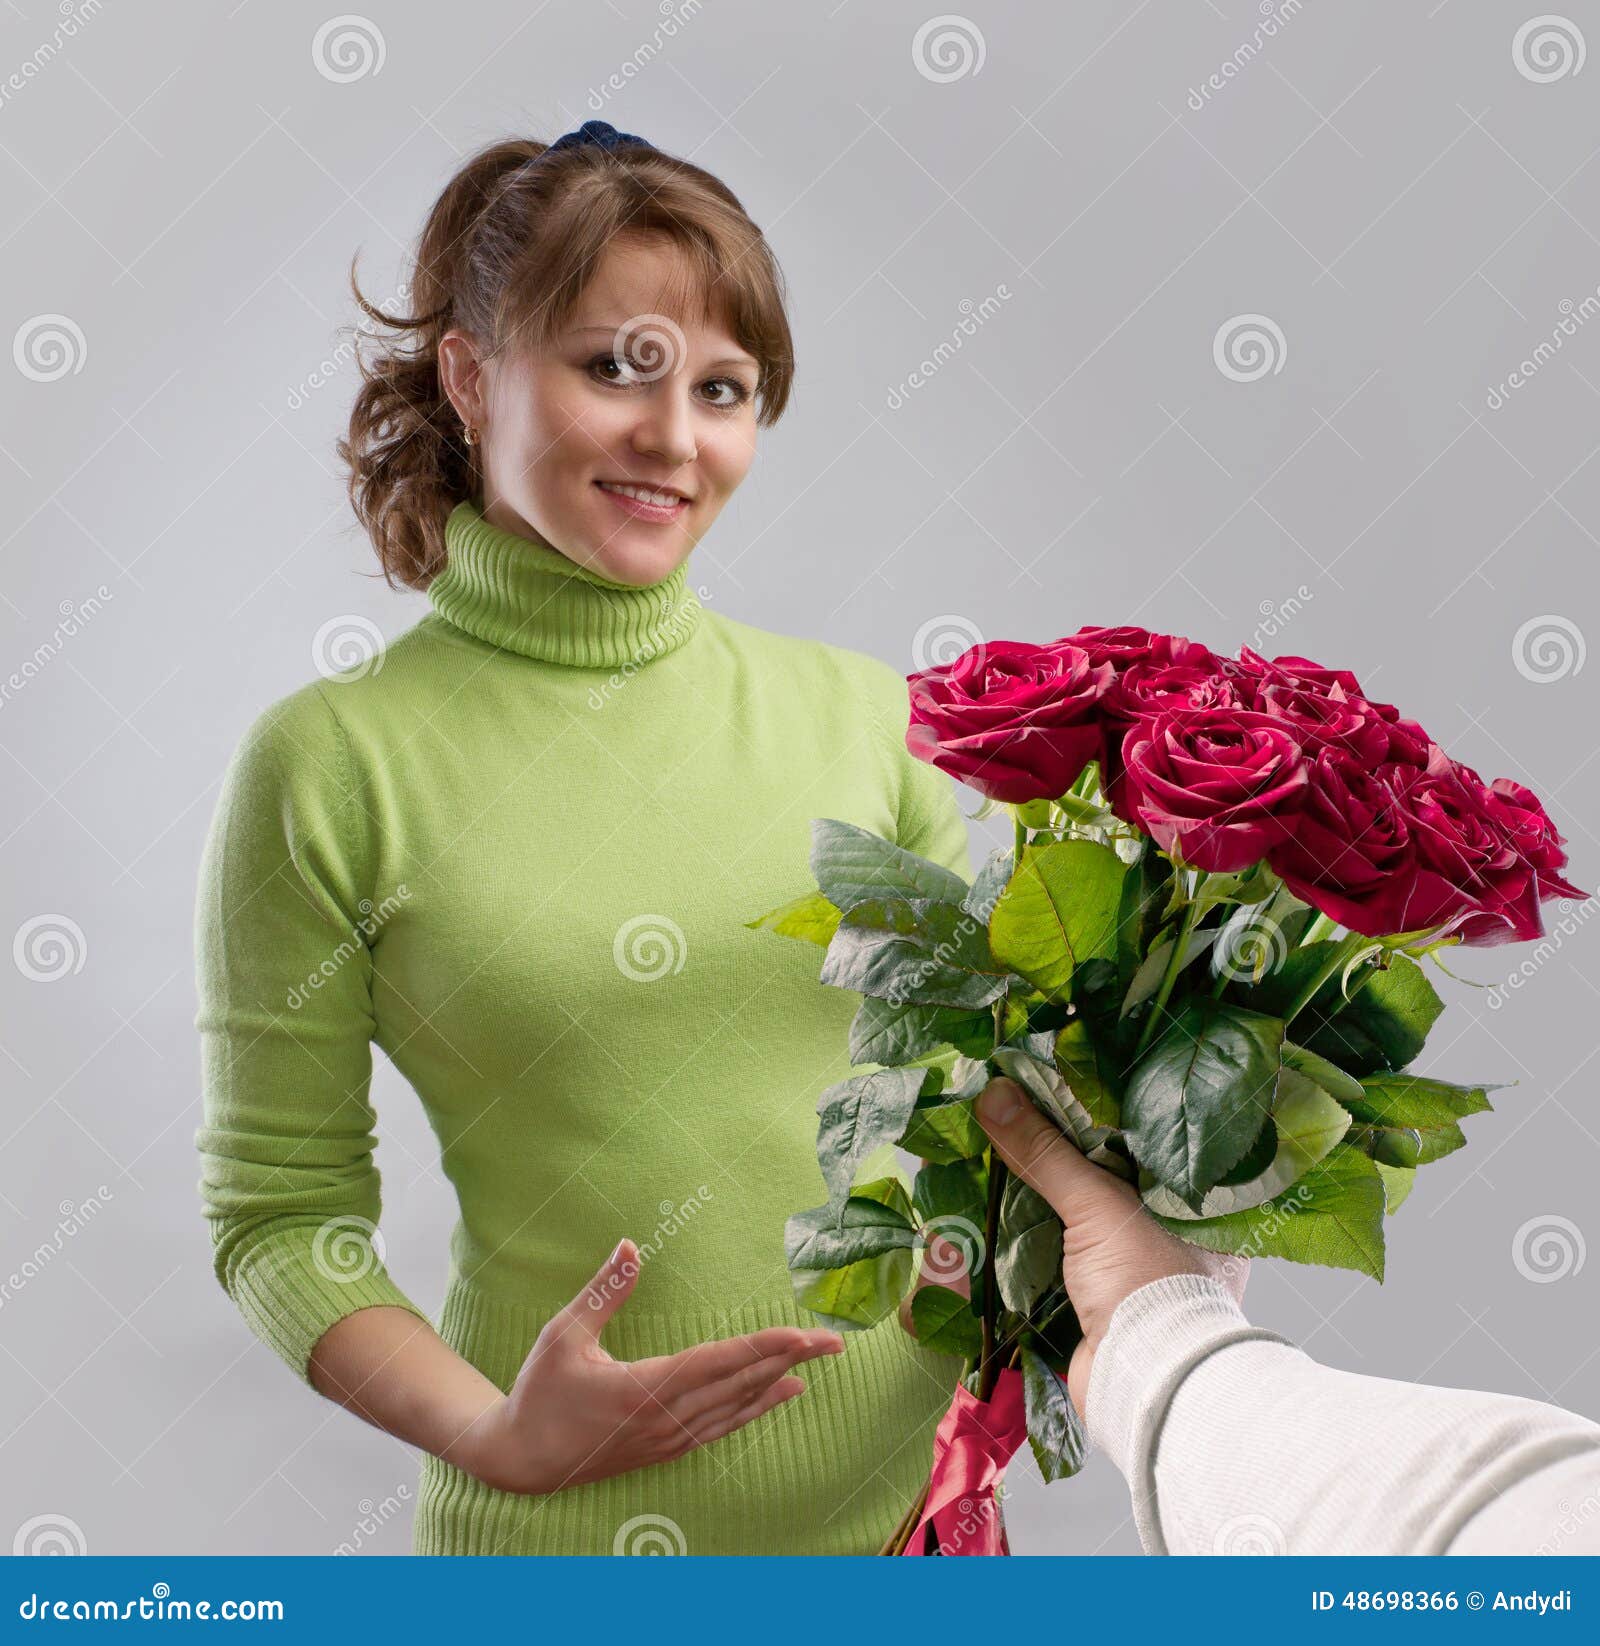 girl presented with a bouquet of flowers